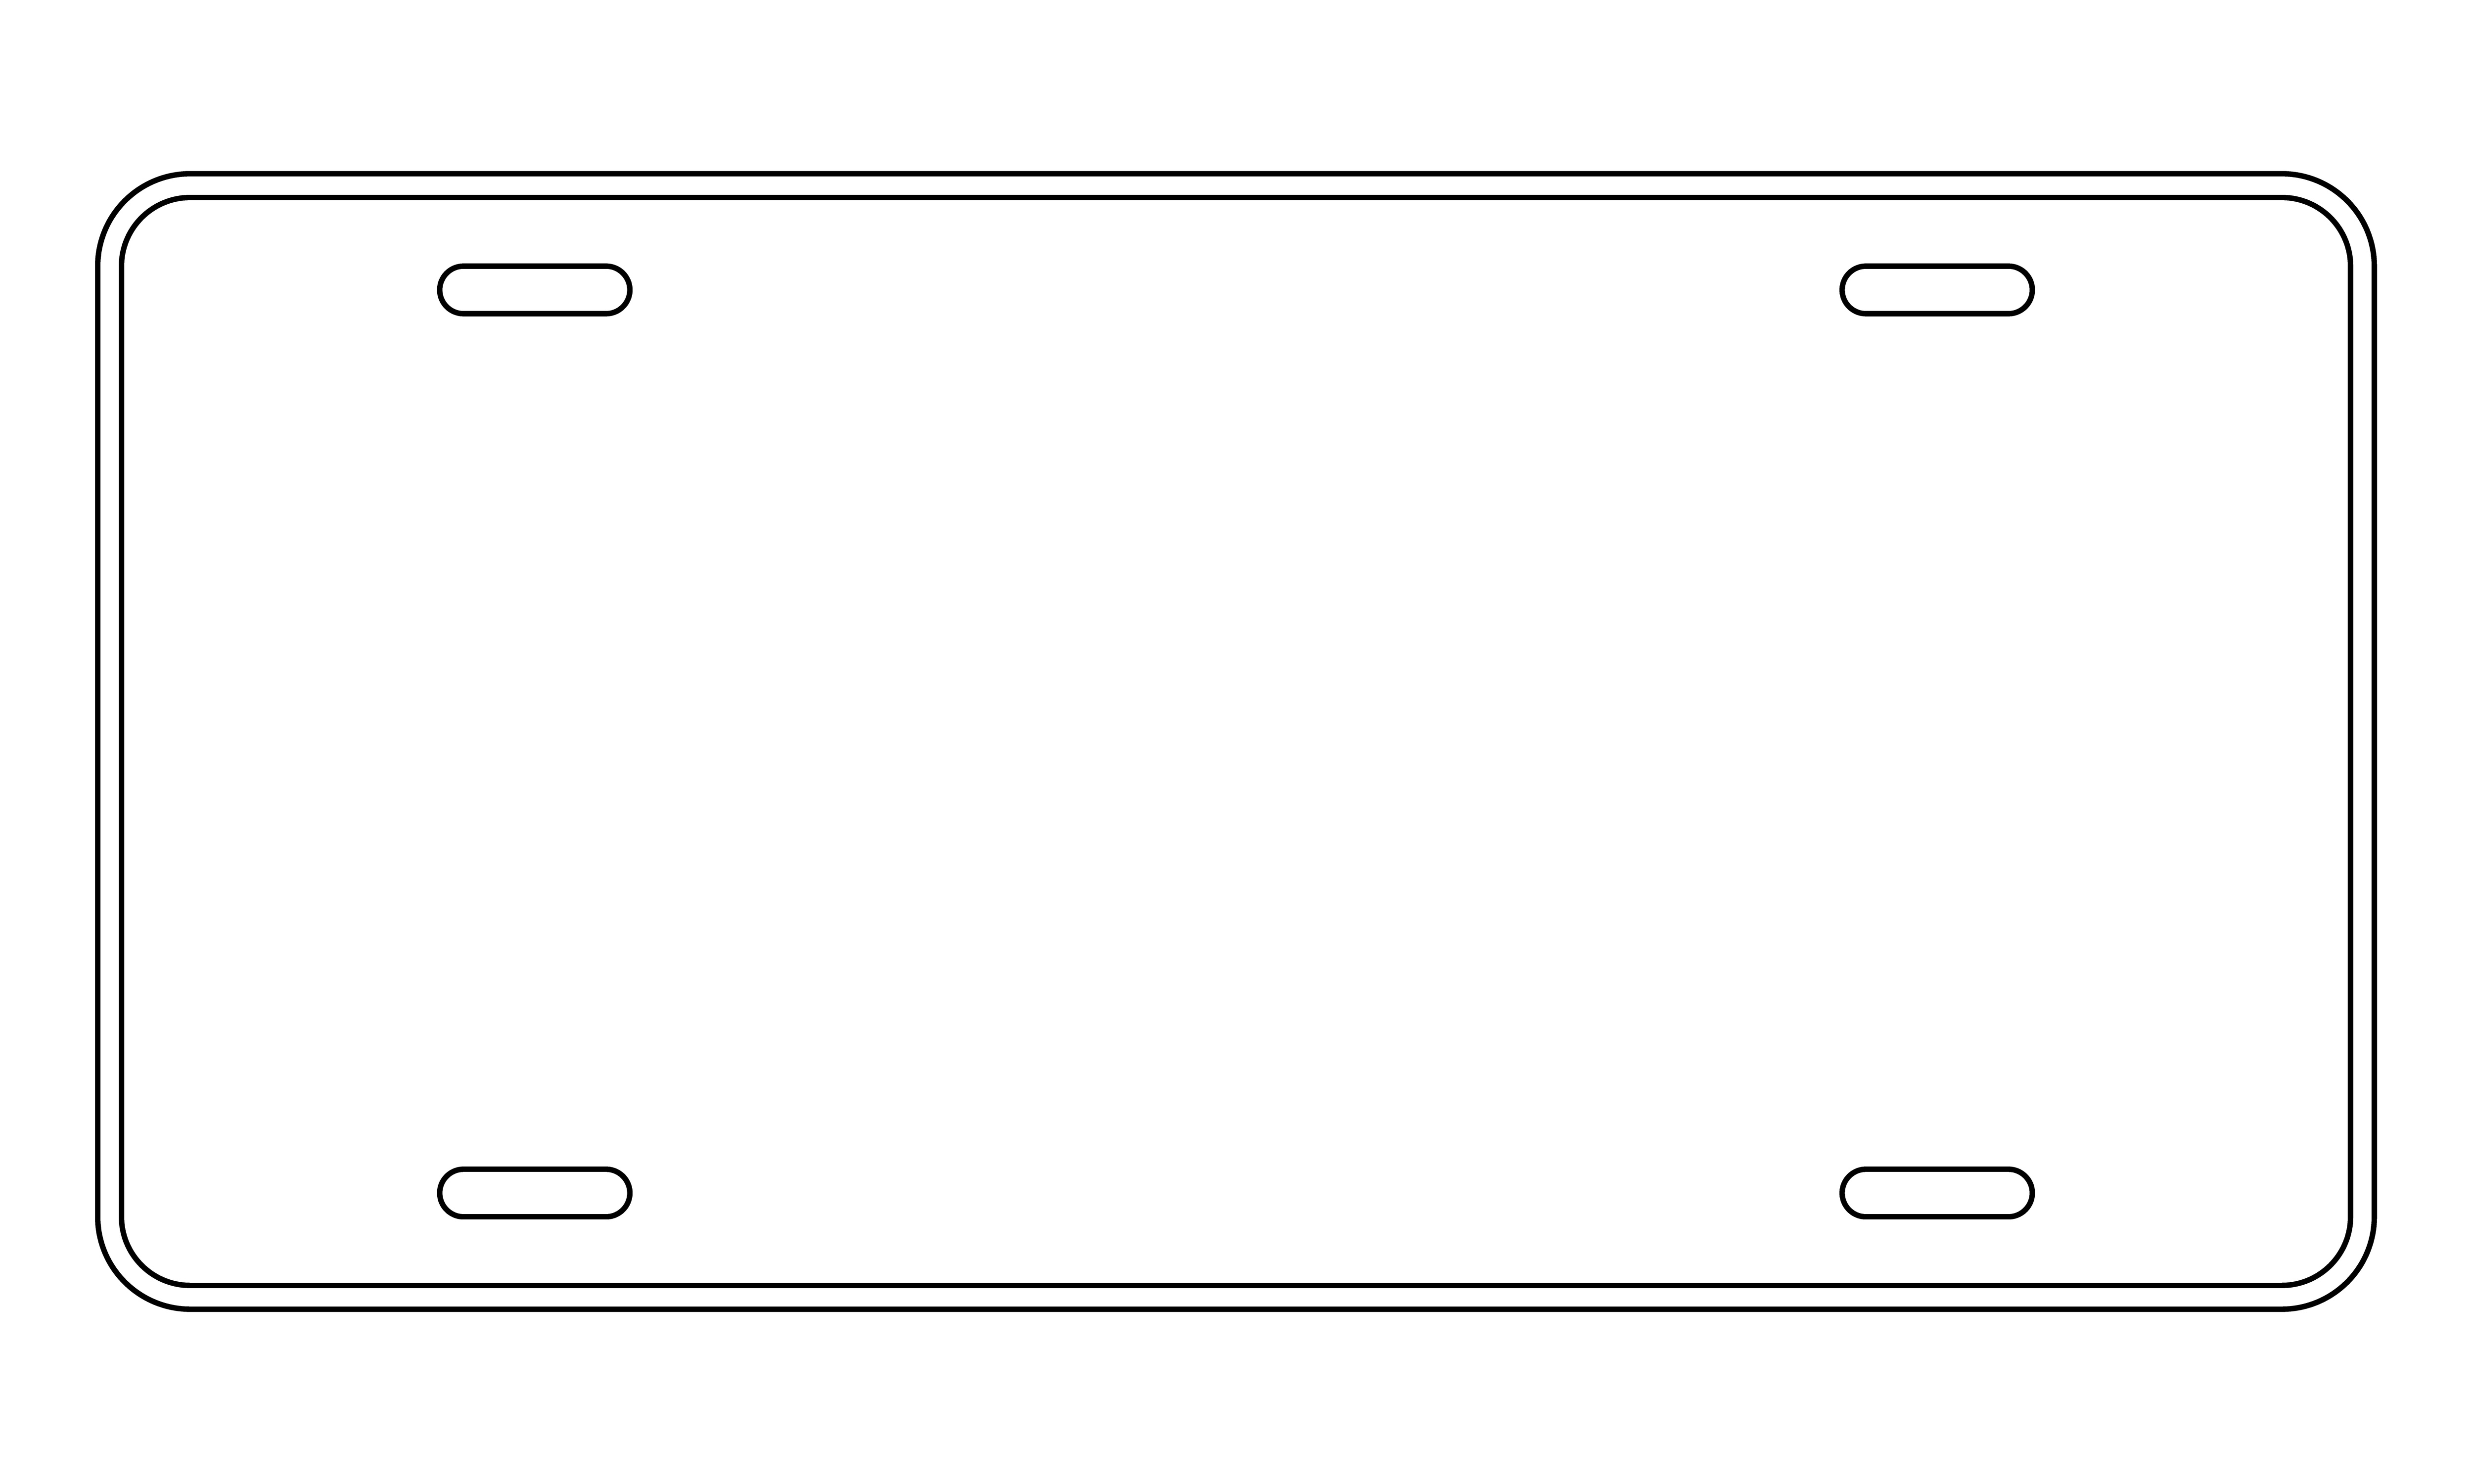 Blank license plate template. Clipart image Site Title